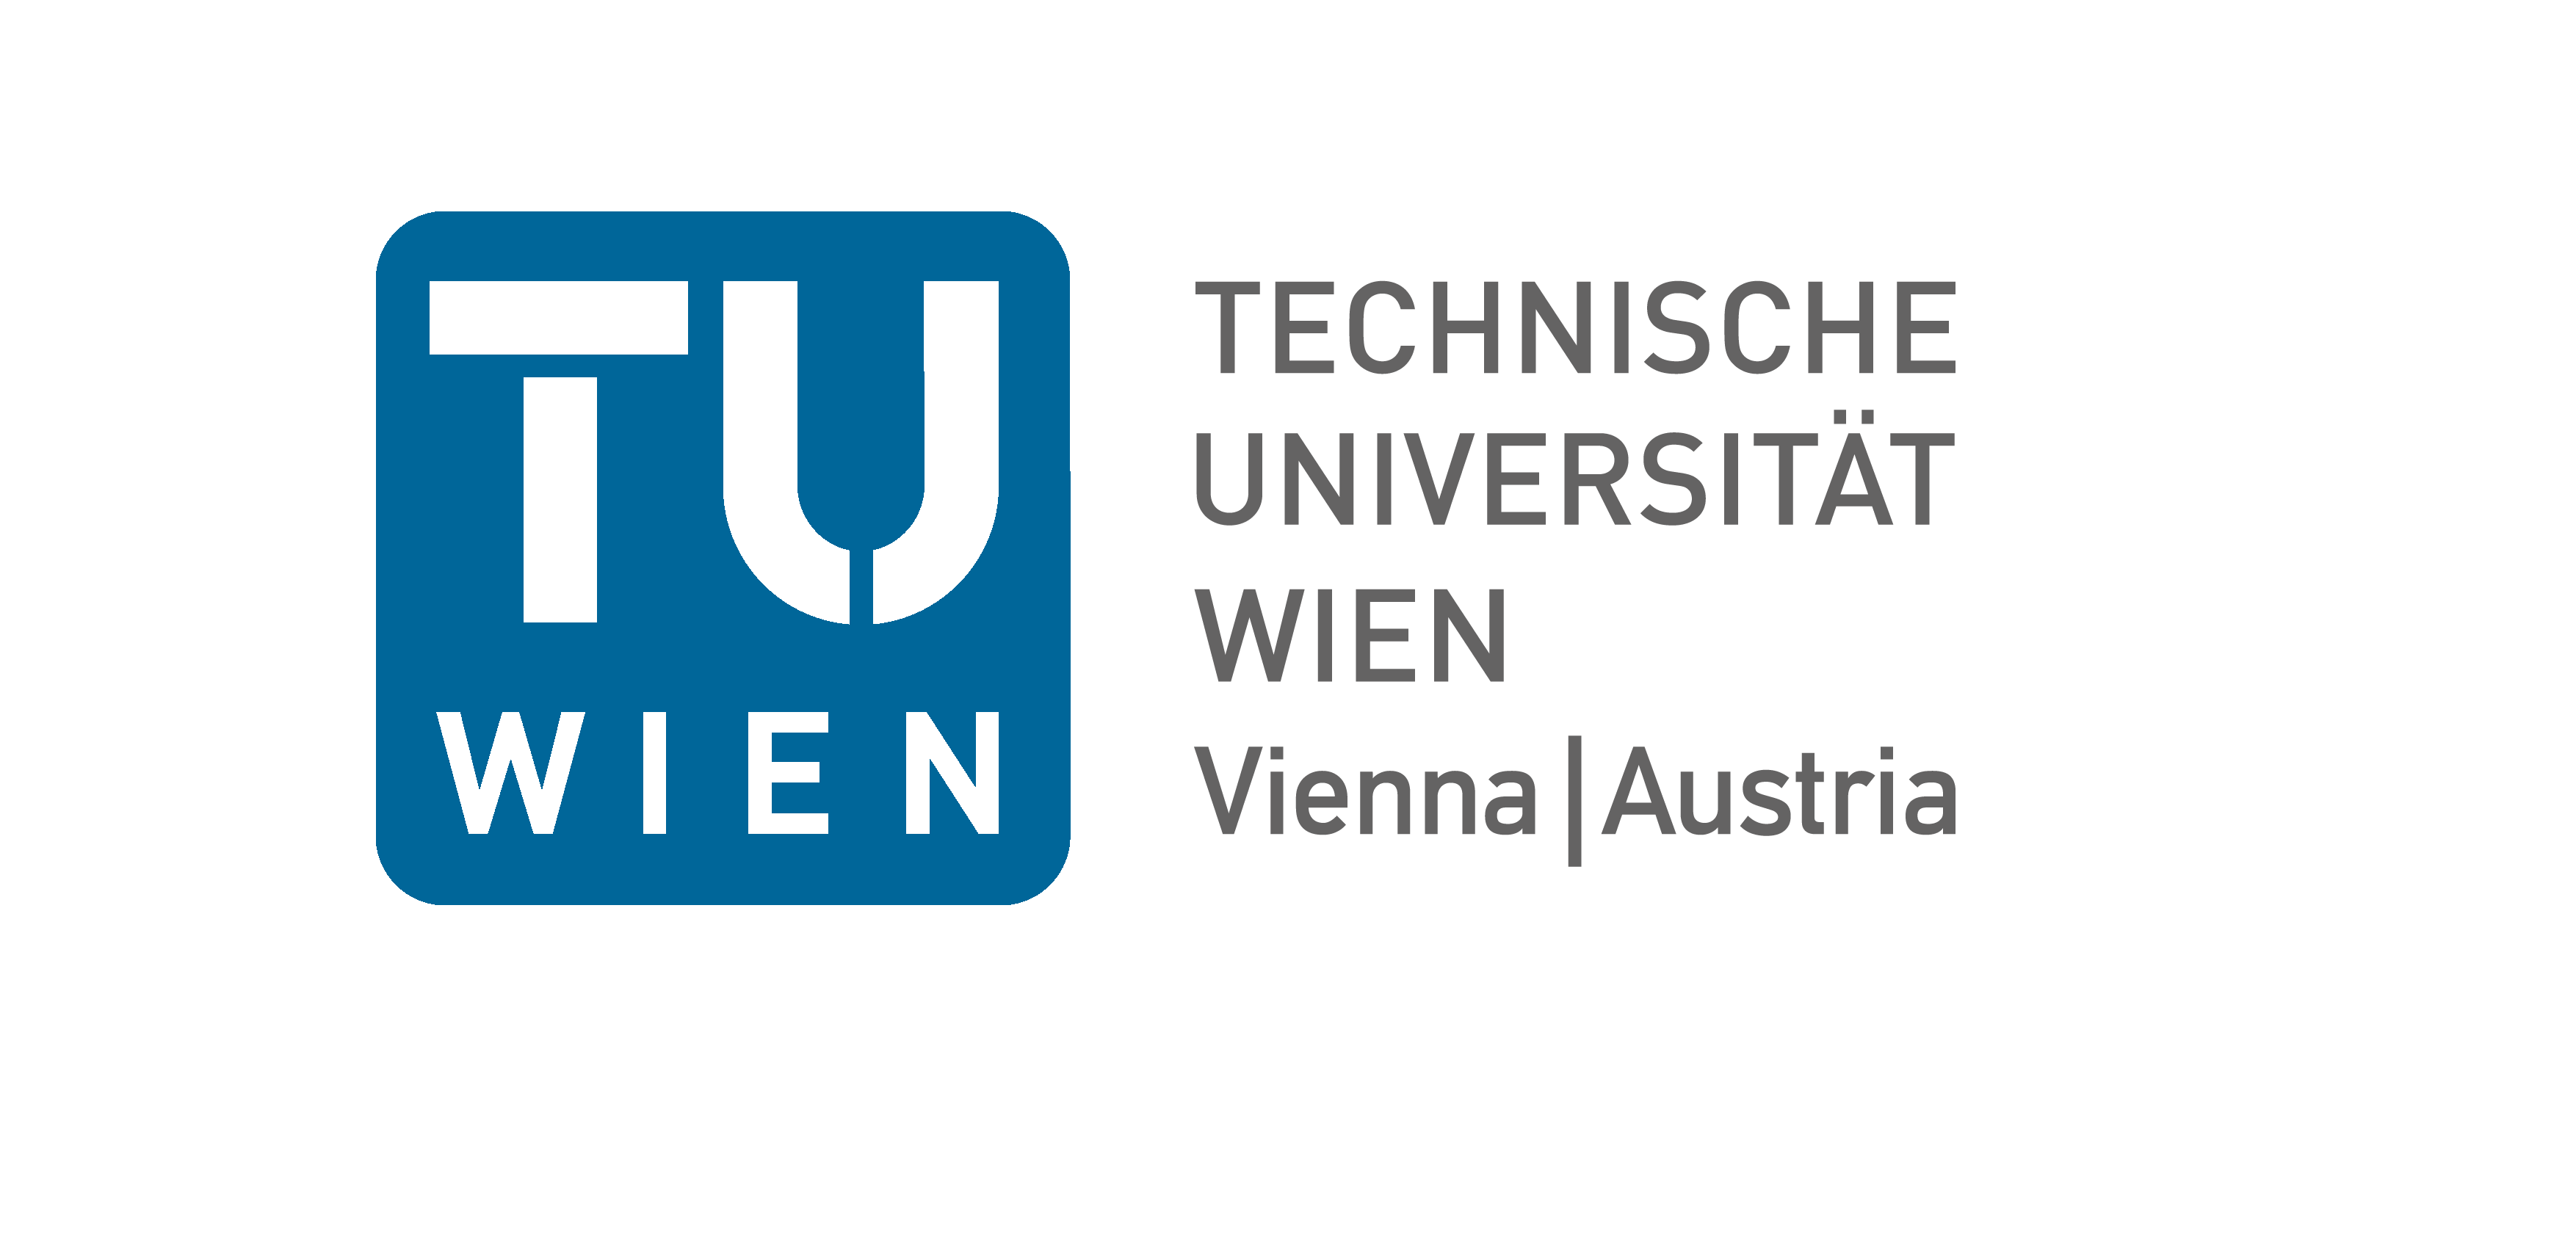 Master’s Program in Logic and Computation at the Vienna University of ...